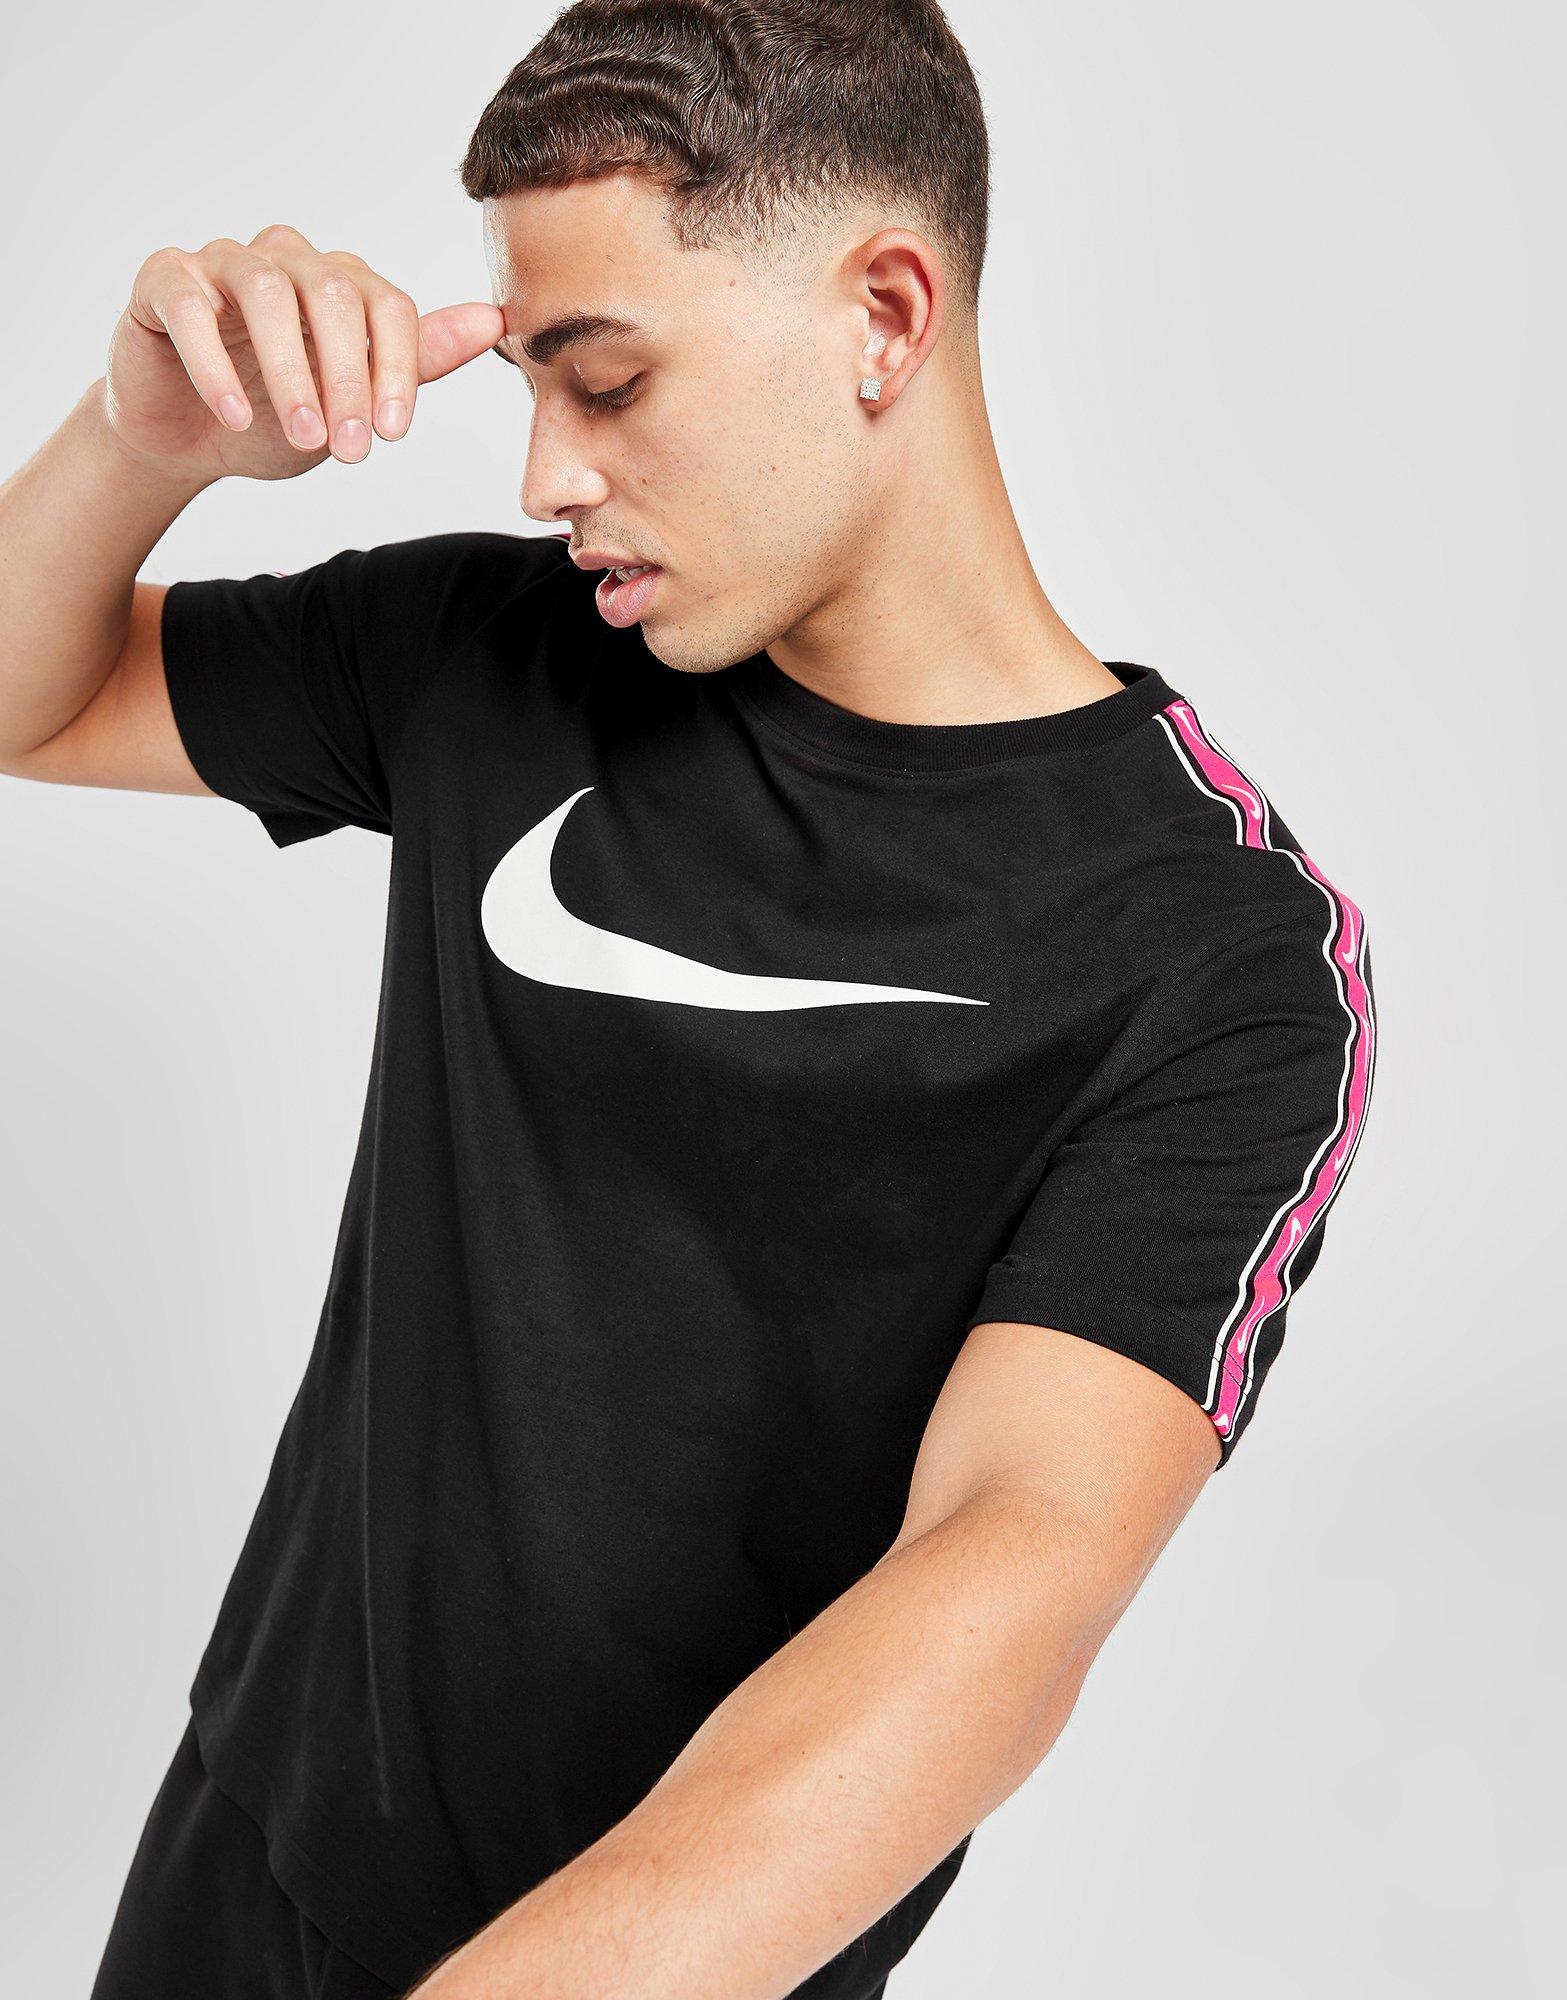 Tee-shirt Nike Repeat pour Homme - DX2032